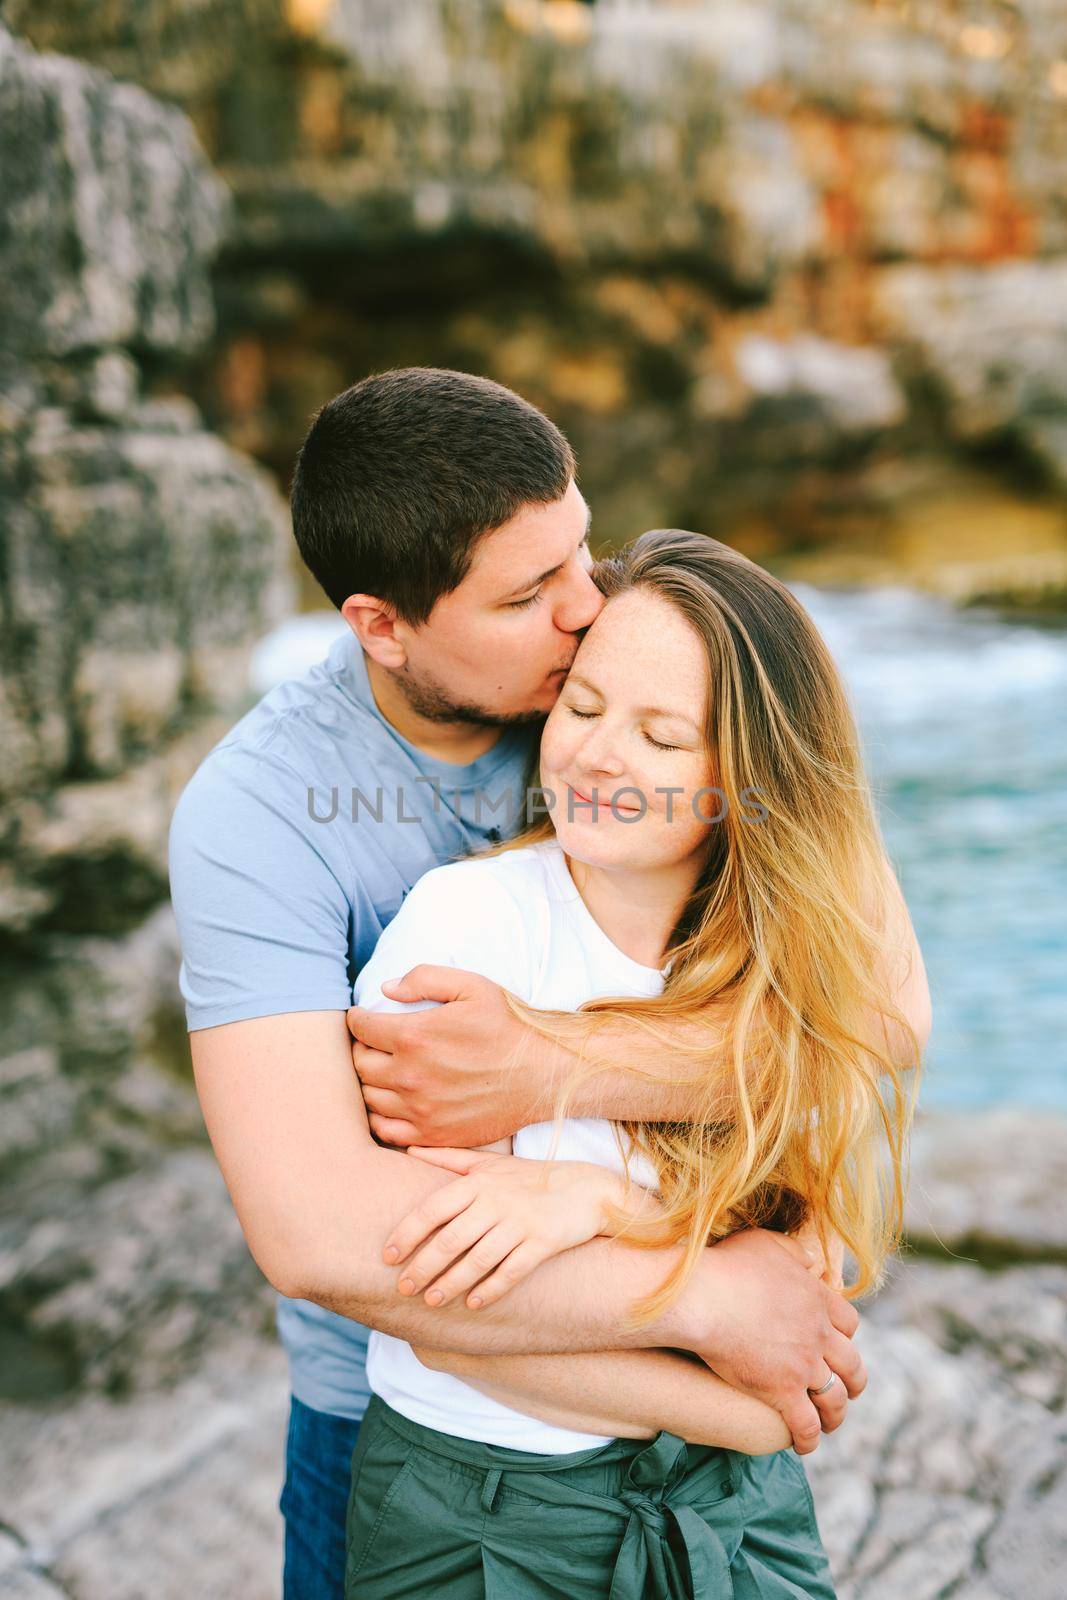 Husband hugs from behind and kisses smiling wife against the background of a rocky shore and water. High quality photo